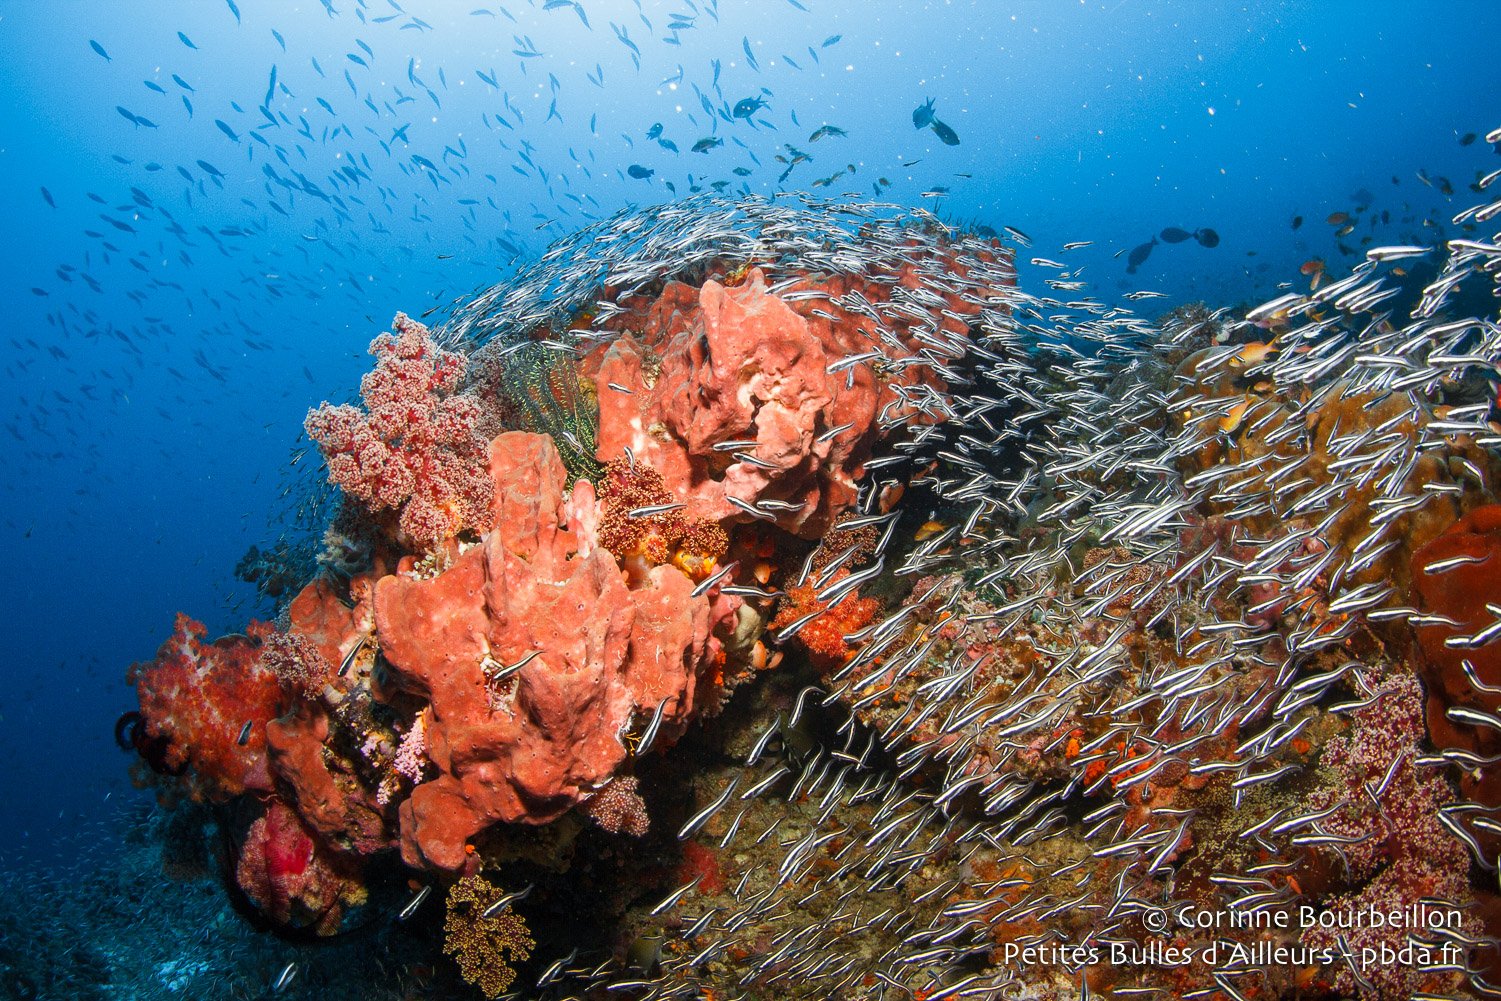 Diving in the heart of the Coral Triangle : Misool, Raja Ampat